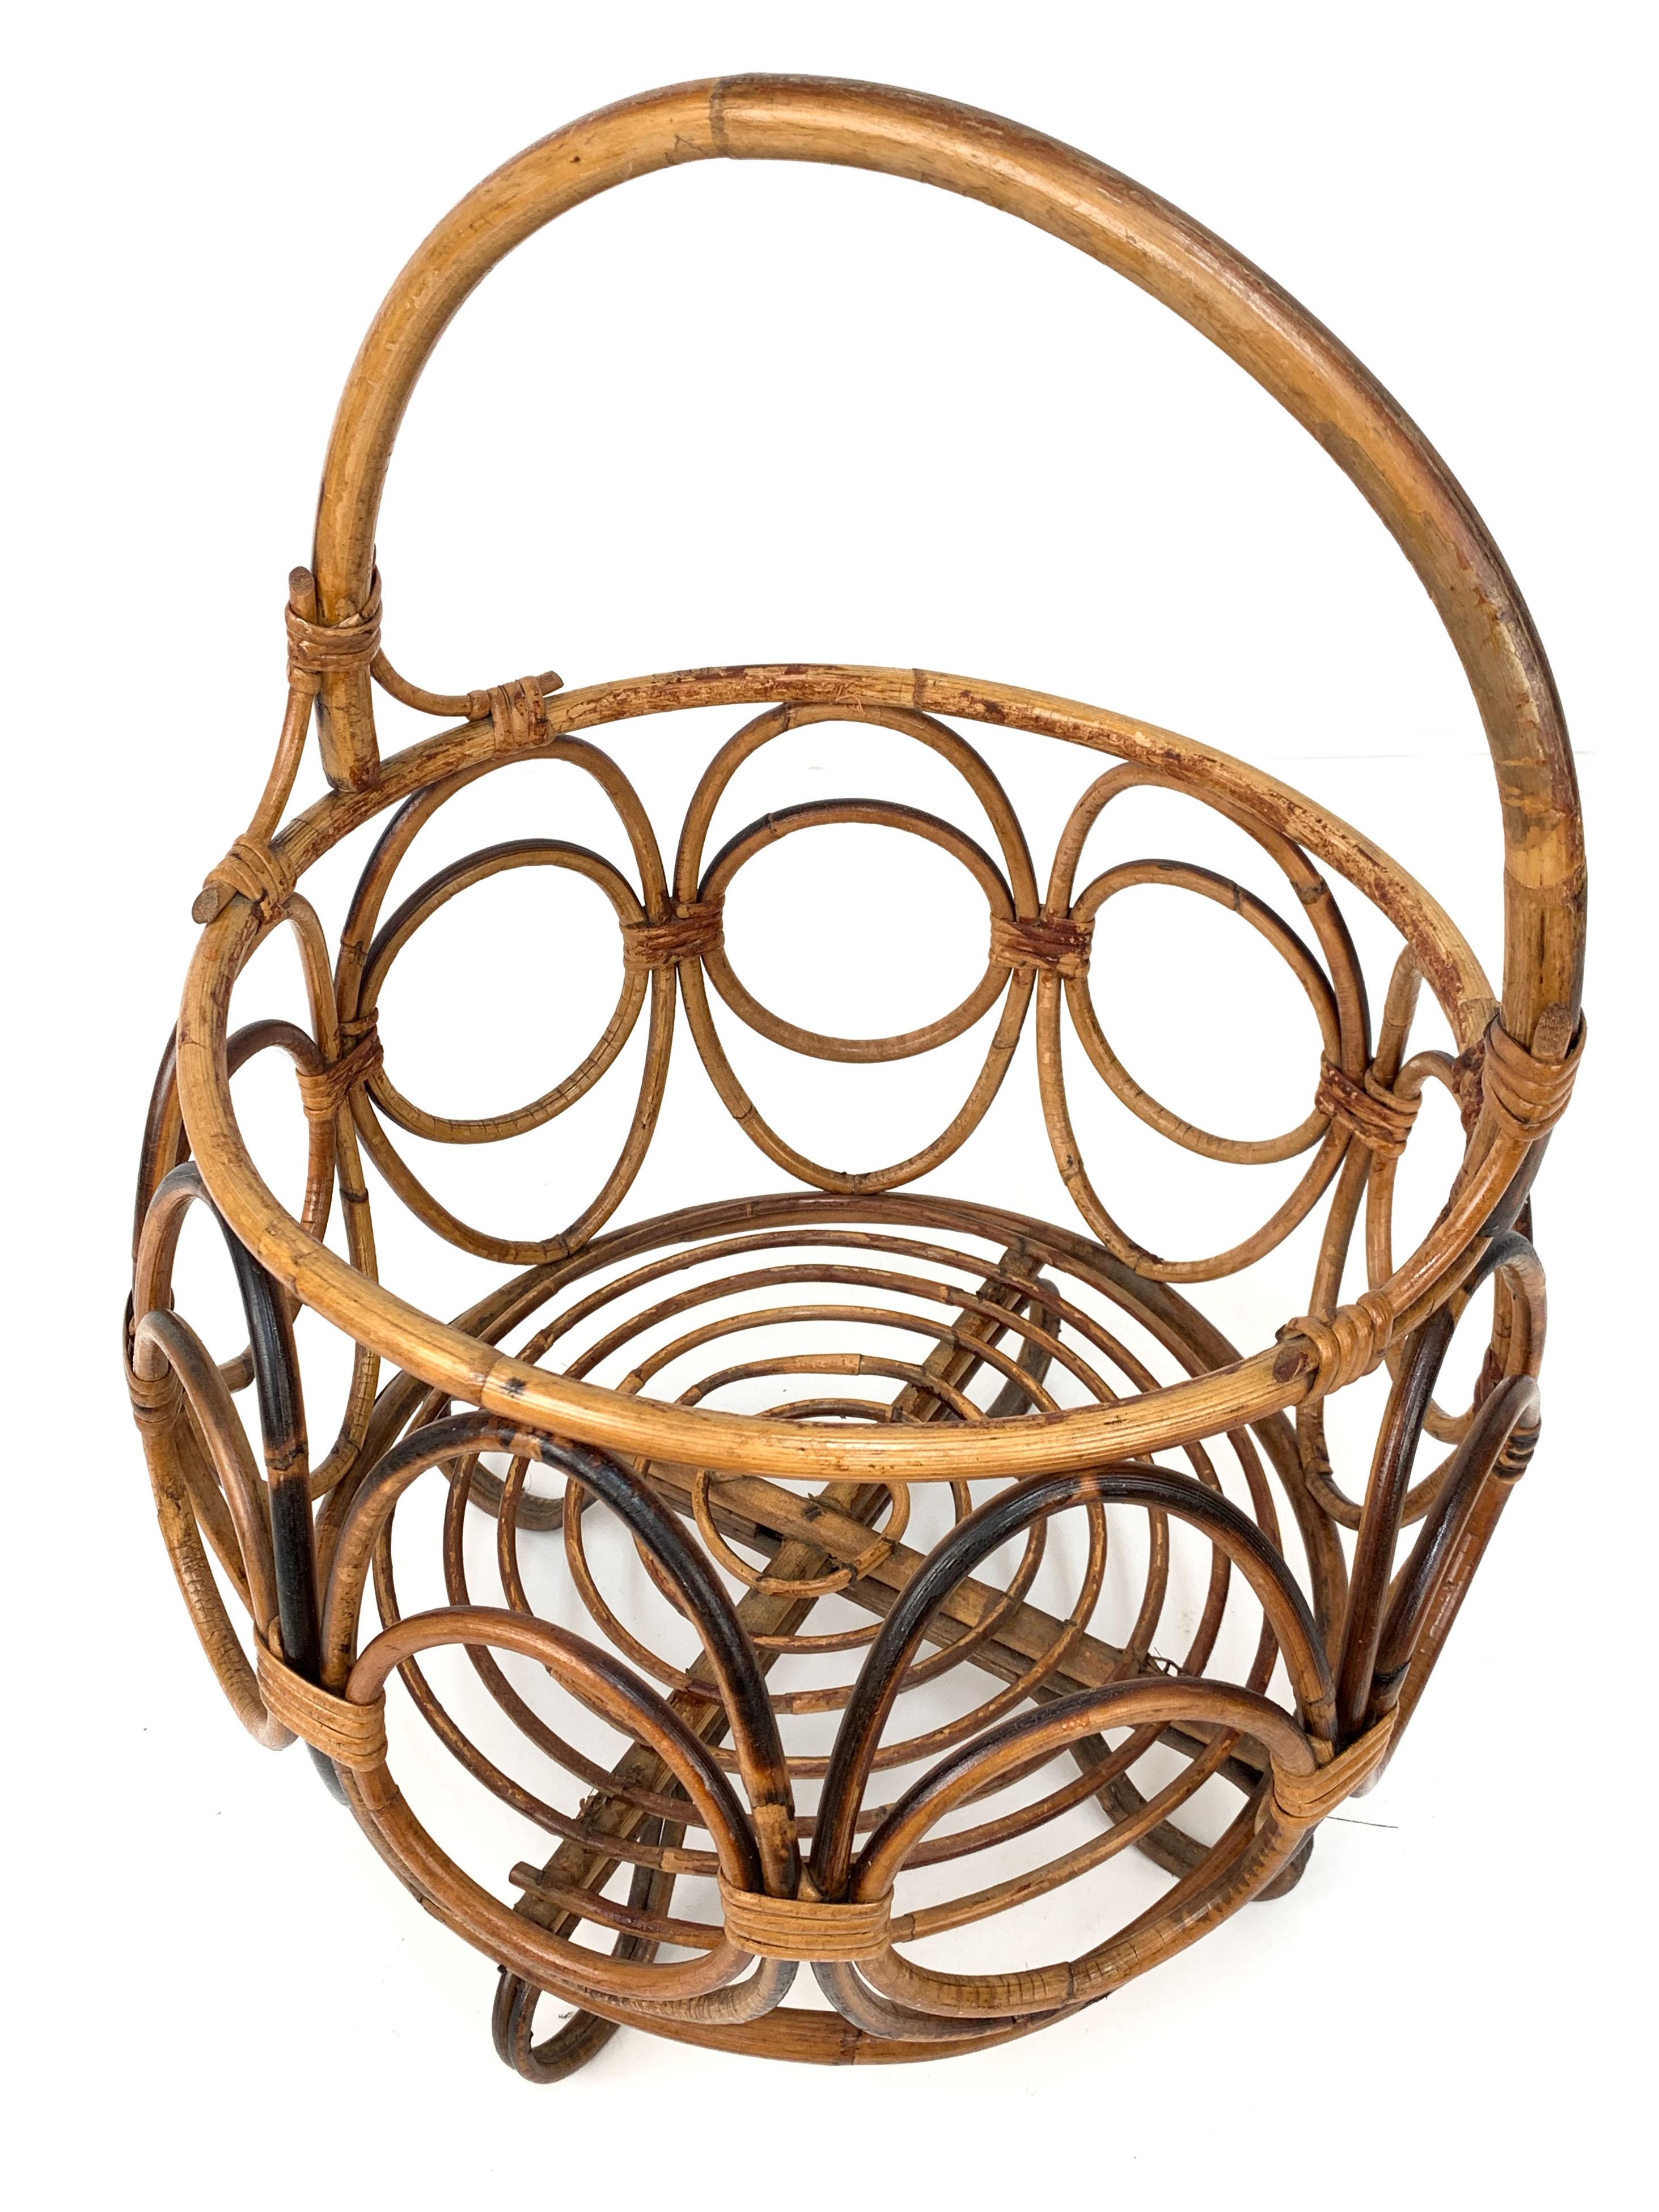 Mid-20th Century Midcentury French Riviera Bamboo and Rattan Italian Round Magazine Rack, 1960s For Sale